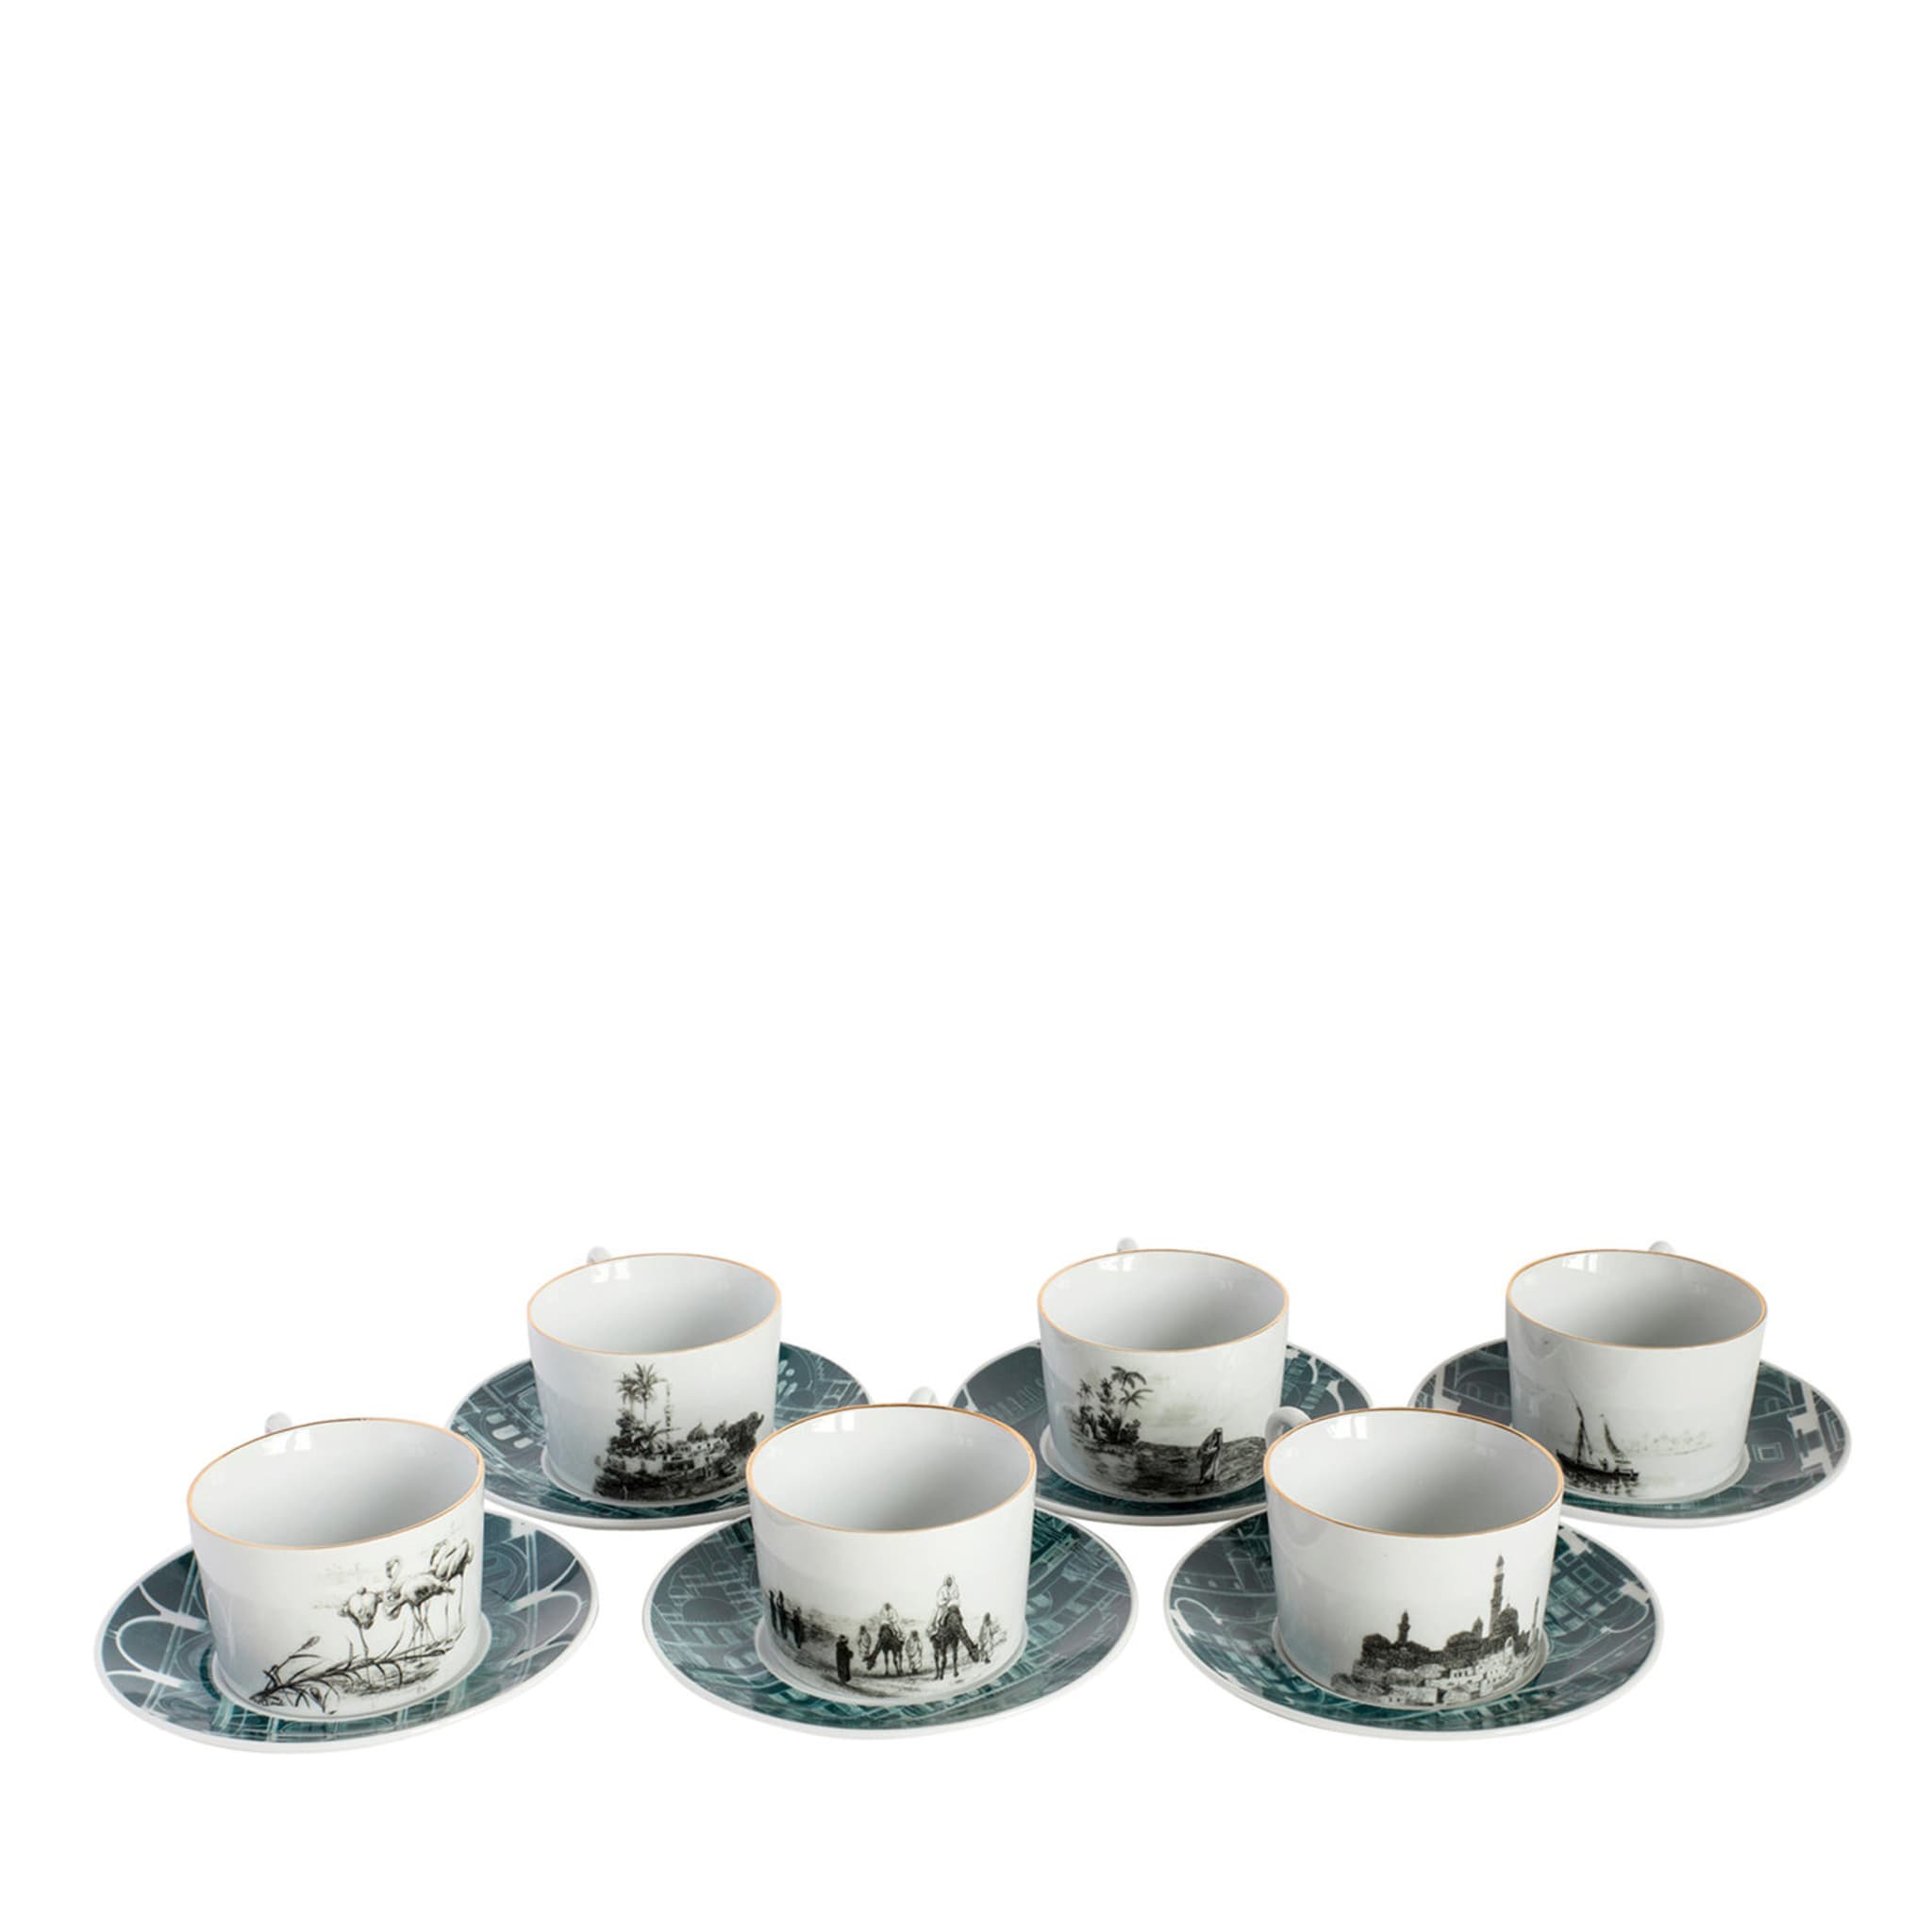 Lebanon Set of 6 Tea Cups with Saucers - Main view